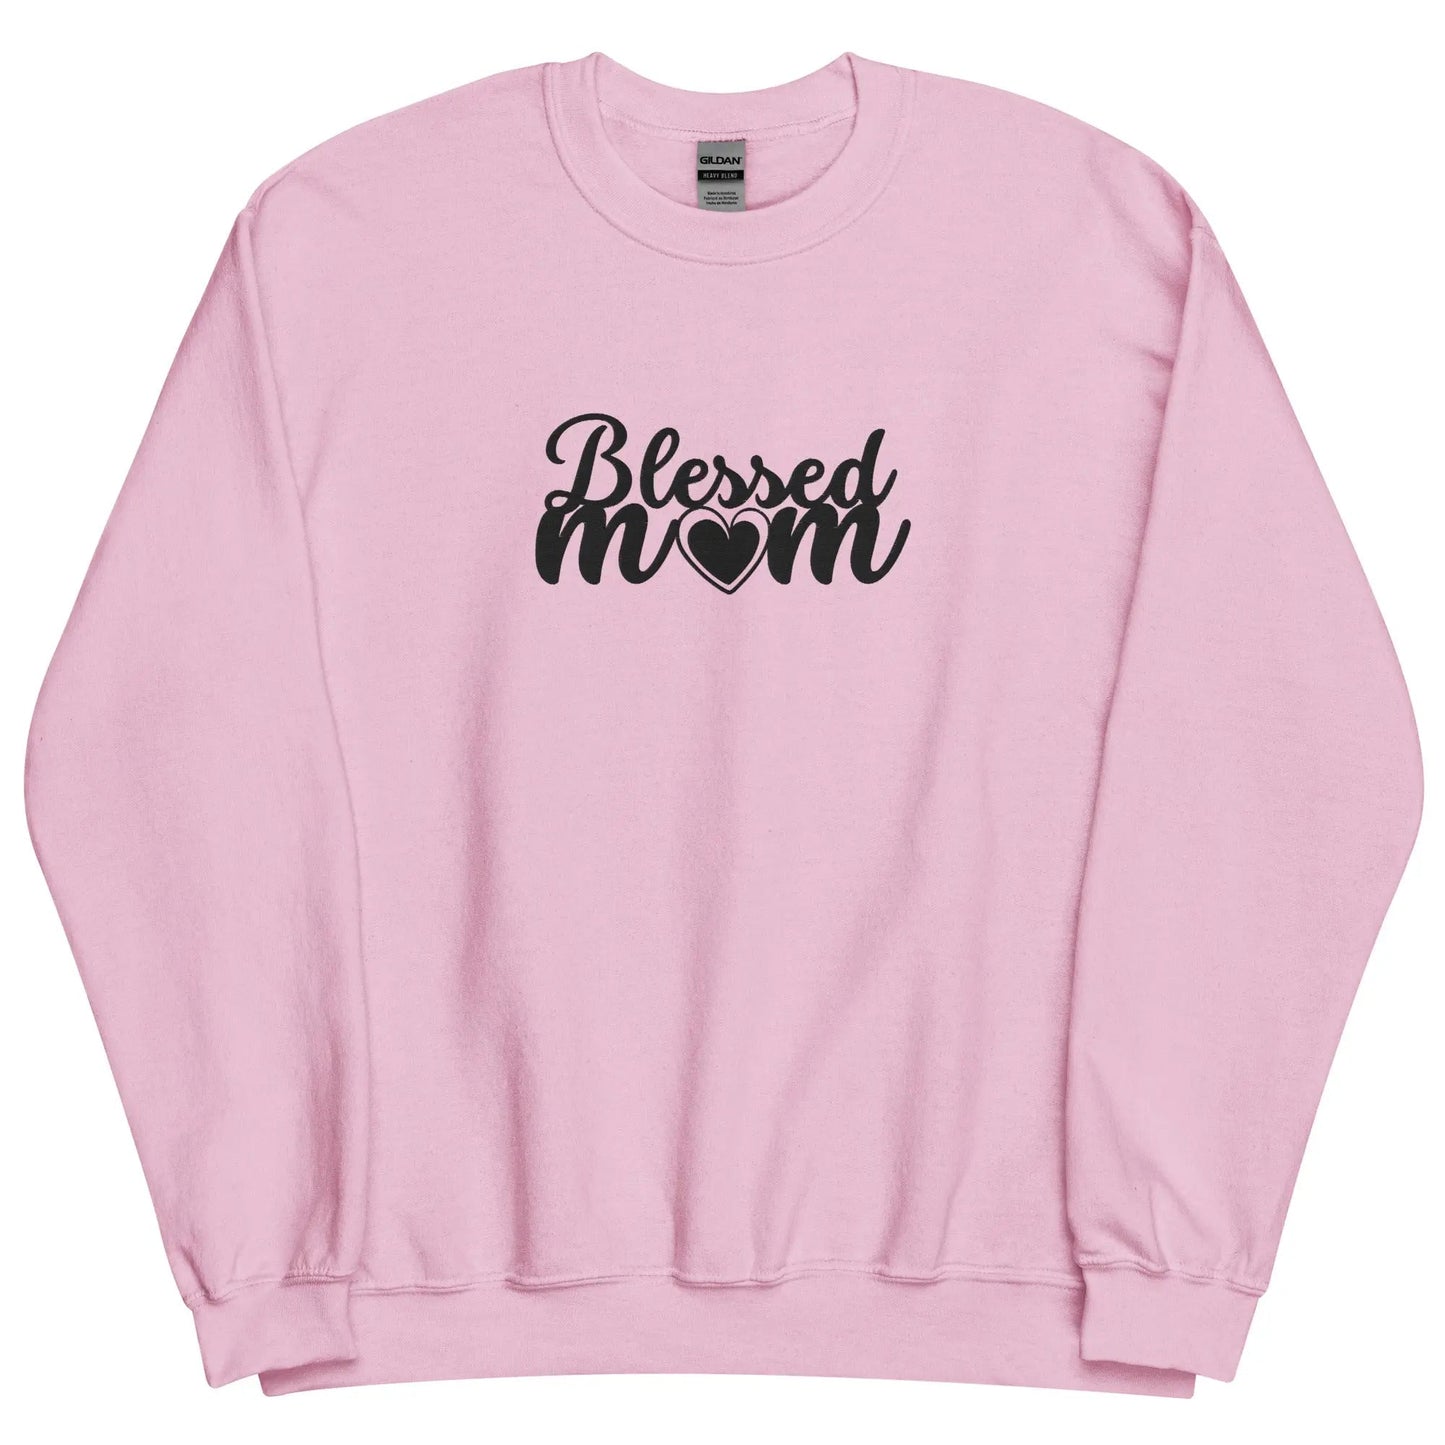 Embroidered Blessed Mom Embroidery Crewneck Sweatshirt-clothes- sweater-Light Pink-S-mysticalcherry